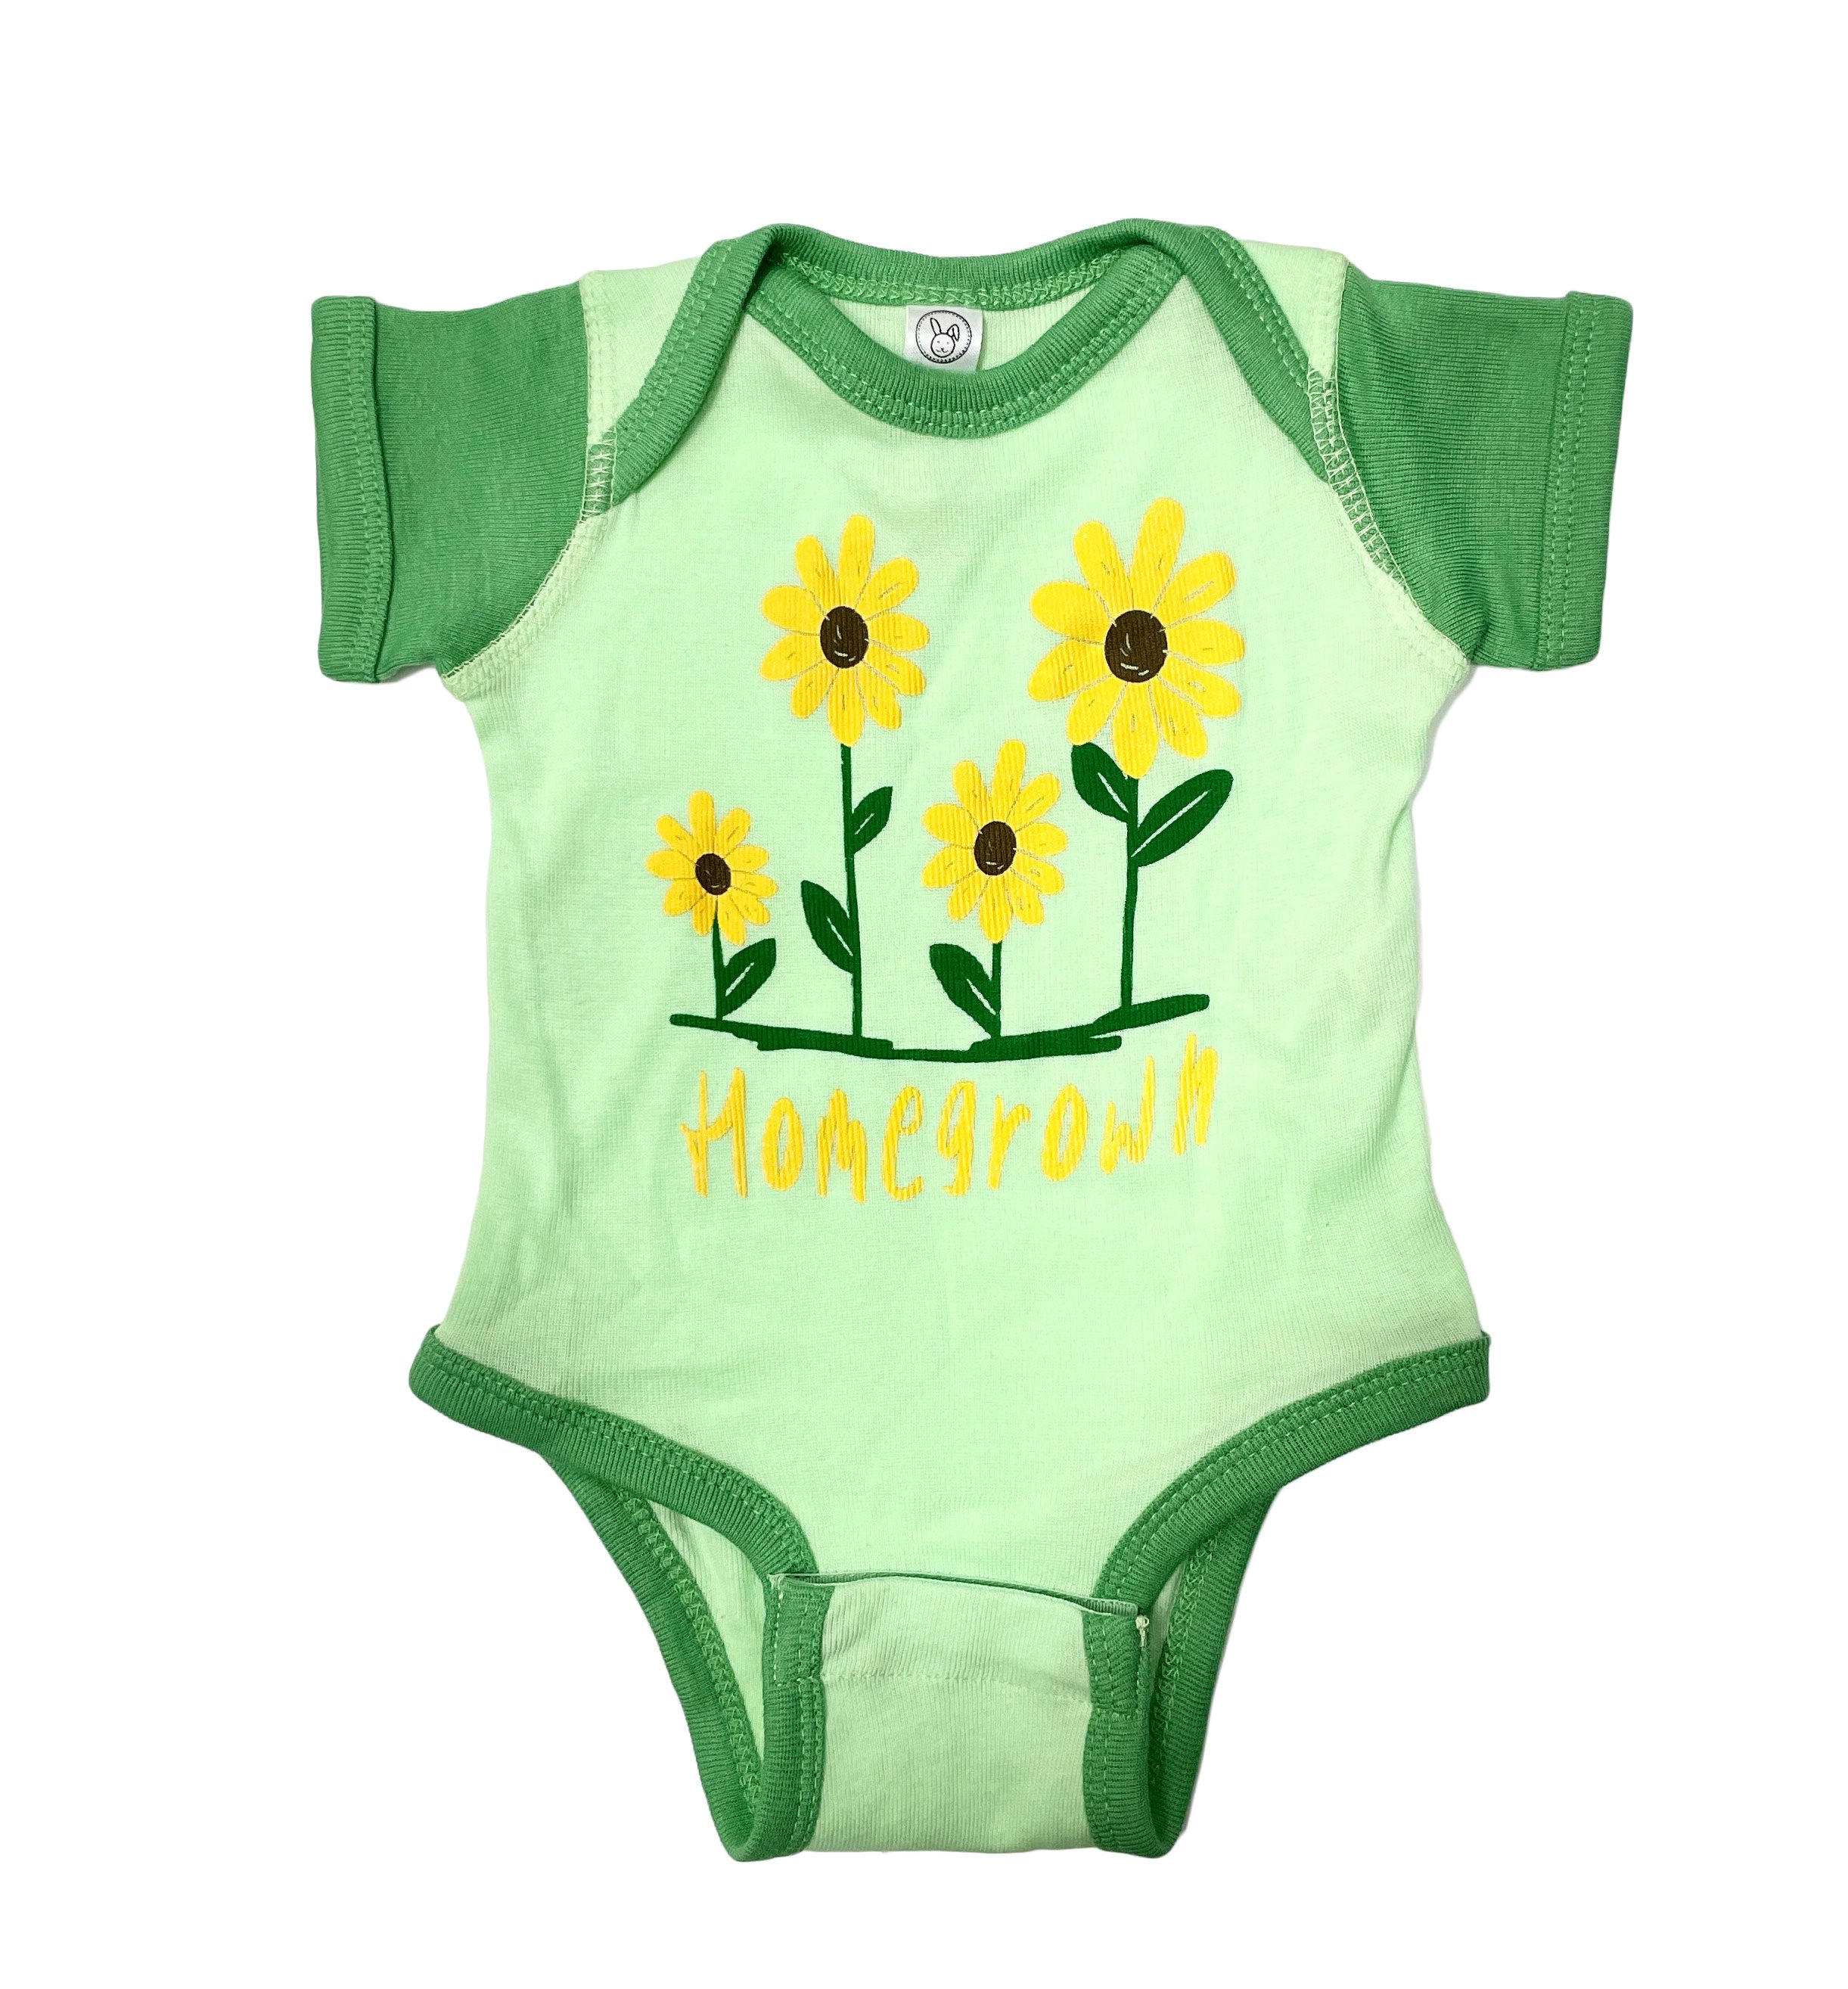 Home Grown Flower Patch (Mint/Grass) / Baby Onesie - Route One Apparel